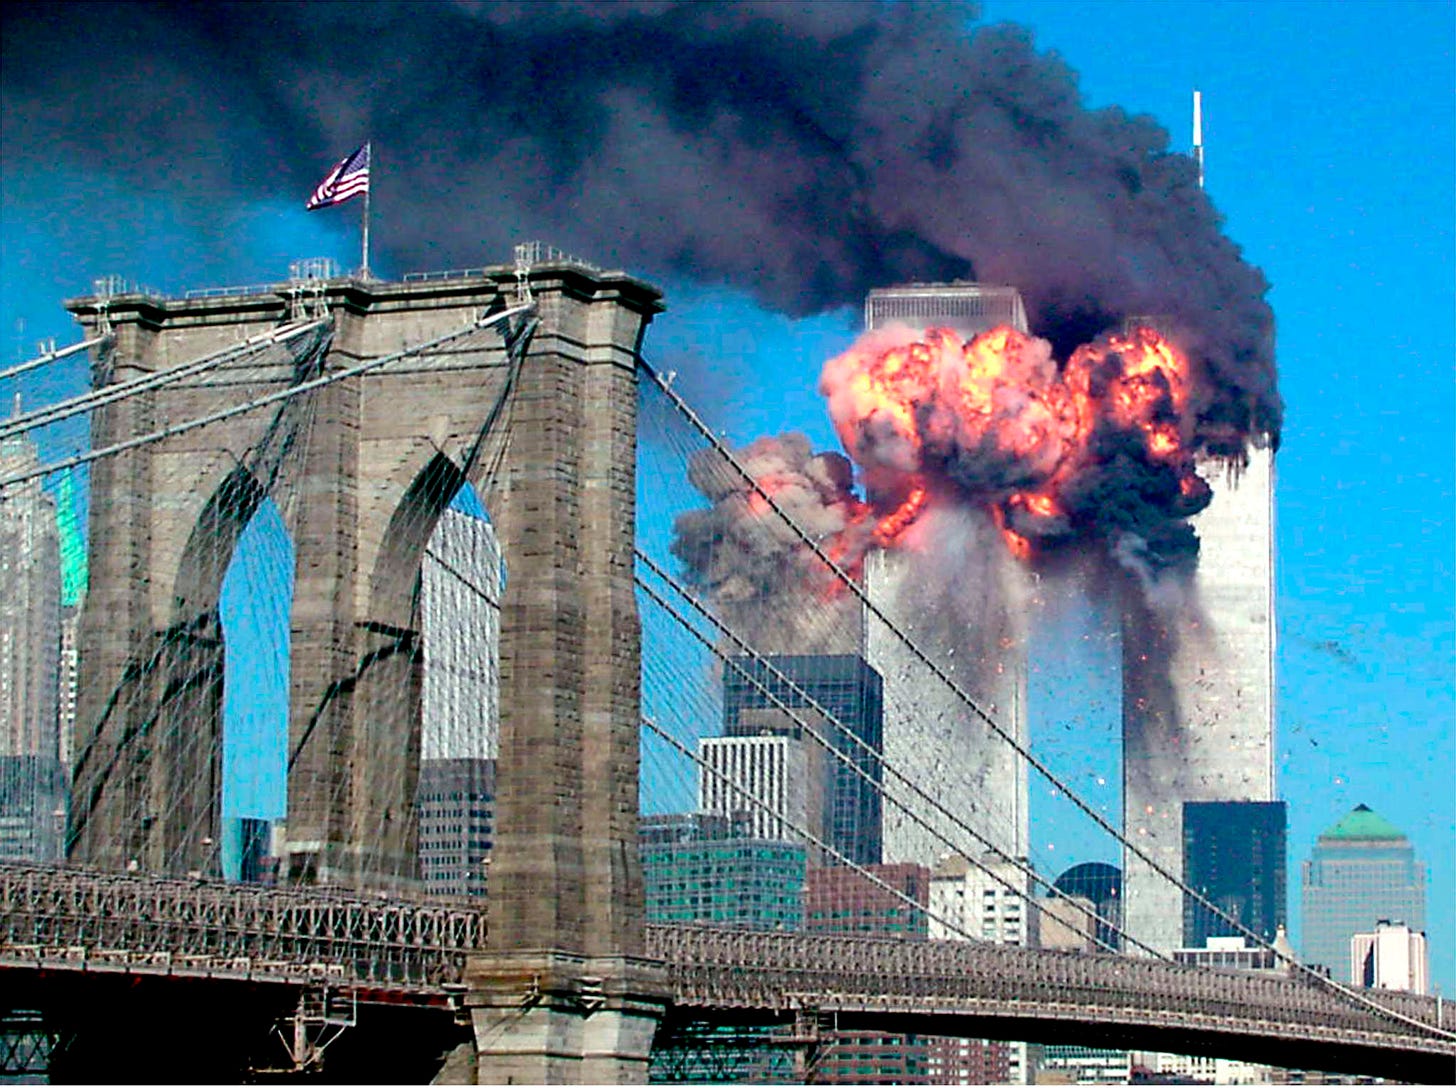 Defining images from the 9/11 attacks